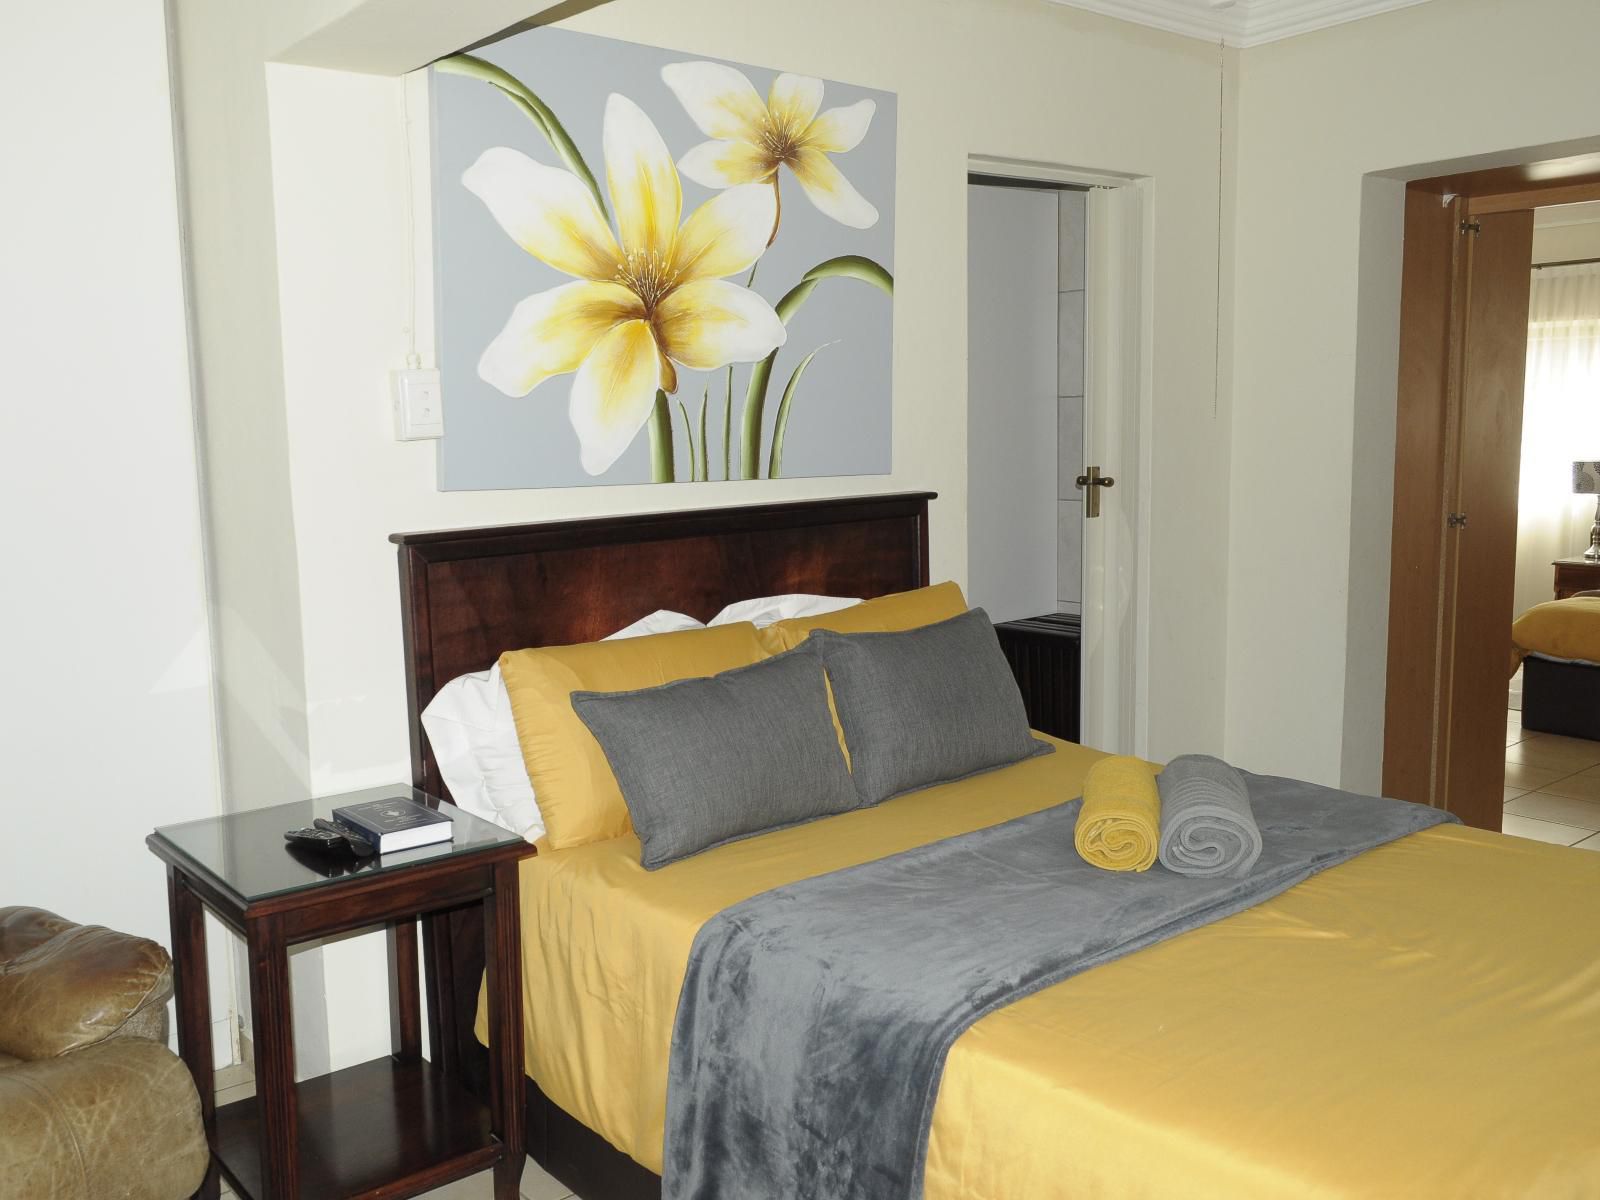 Home Guest House Protea Park Rustenburg North West Province South Africa Bedroom